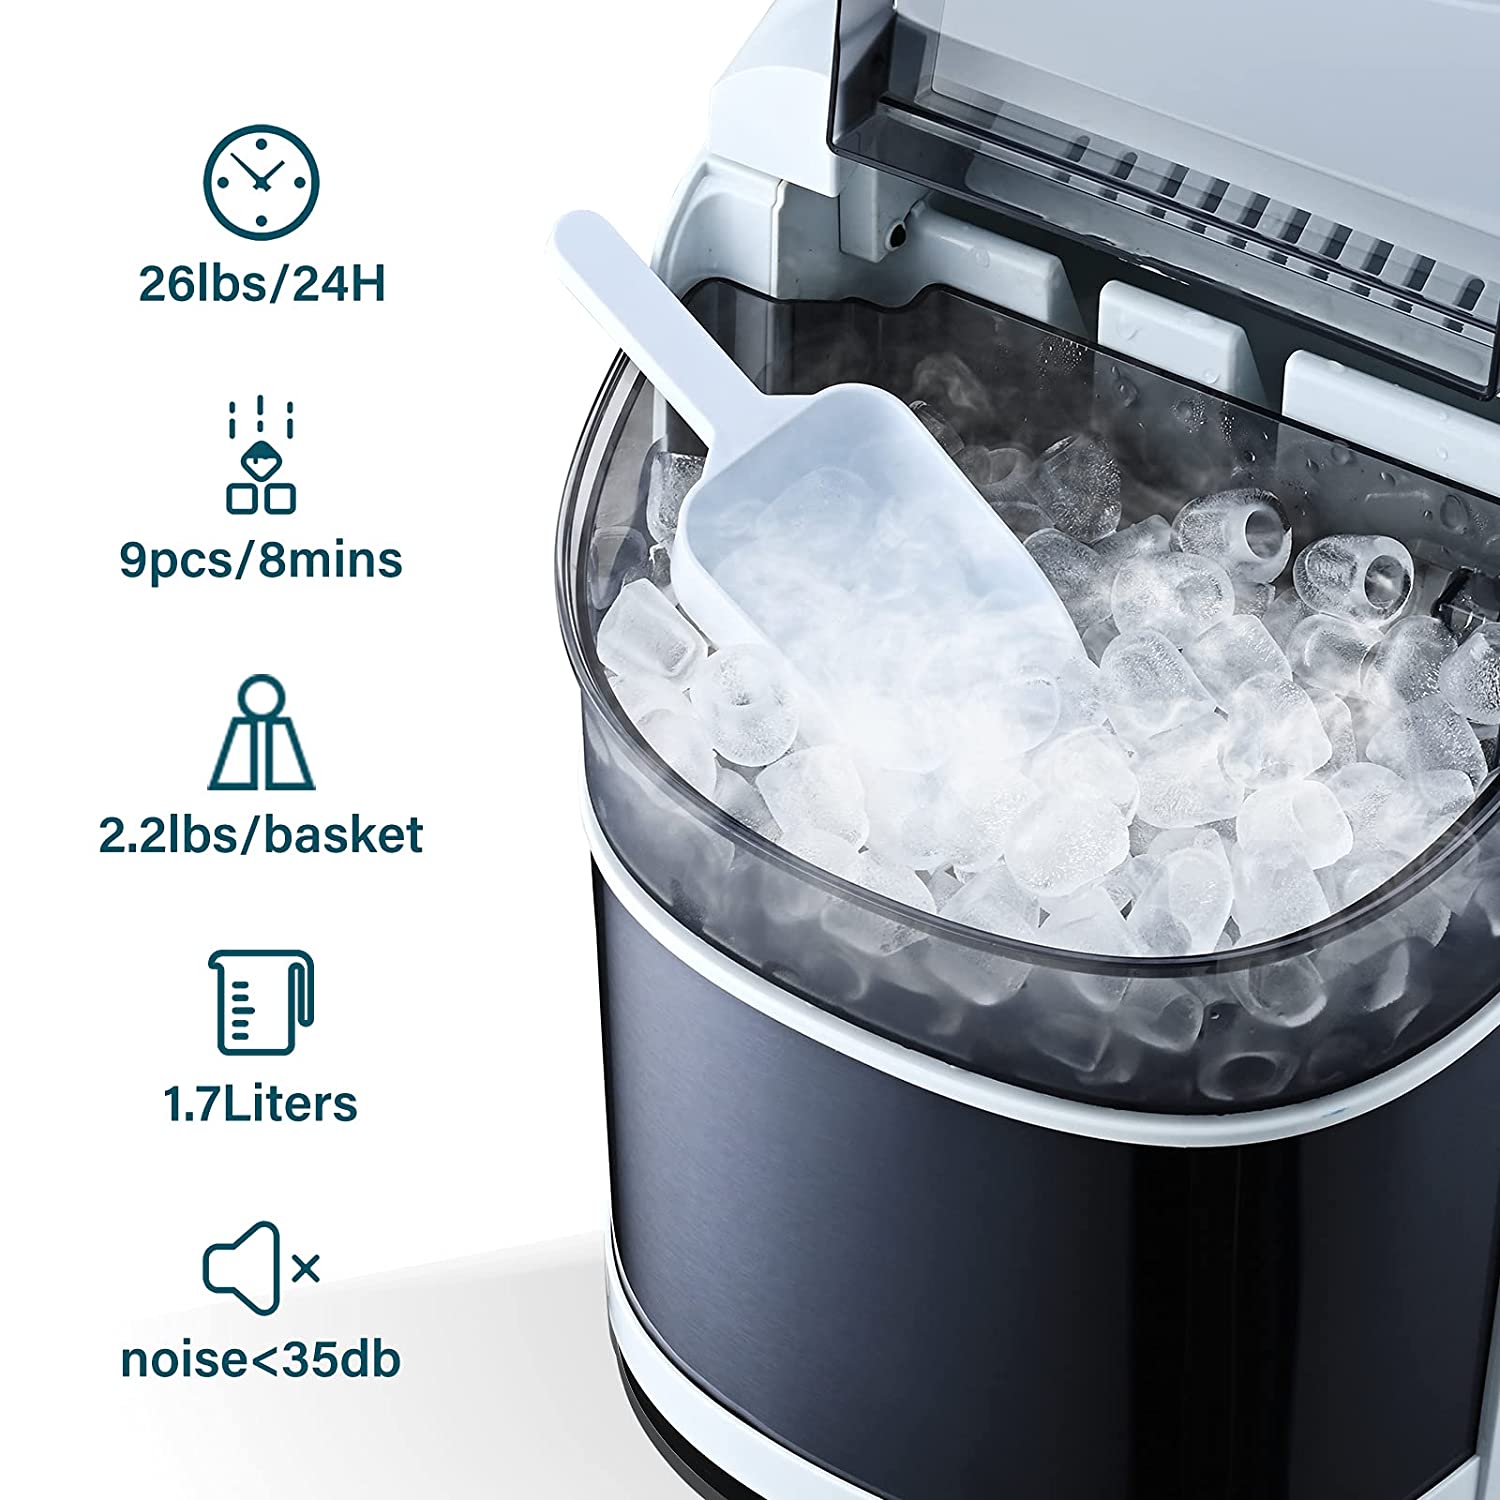 This self-cleaning ice making machine can make ice in 6 minutes. –